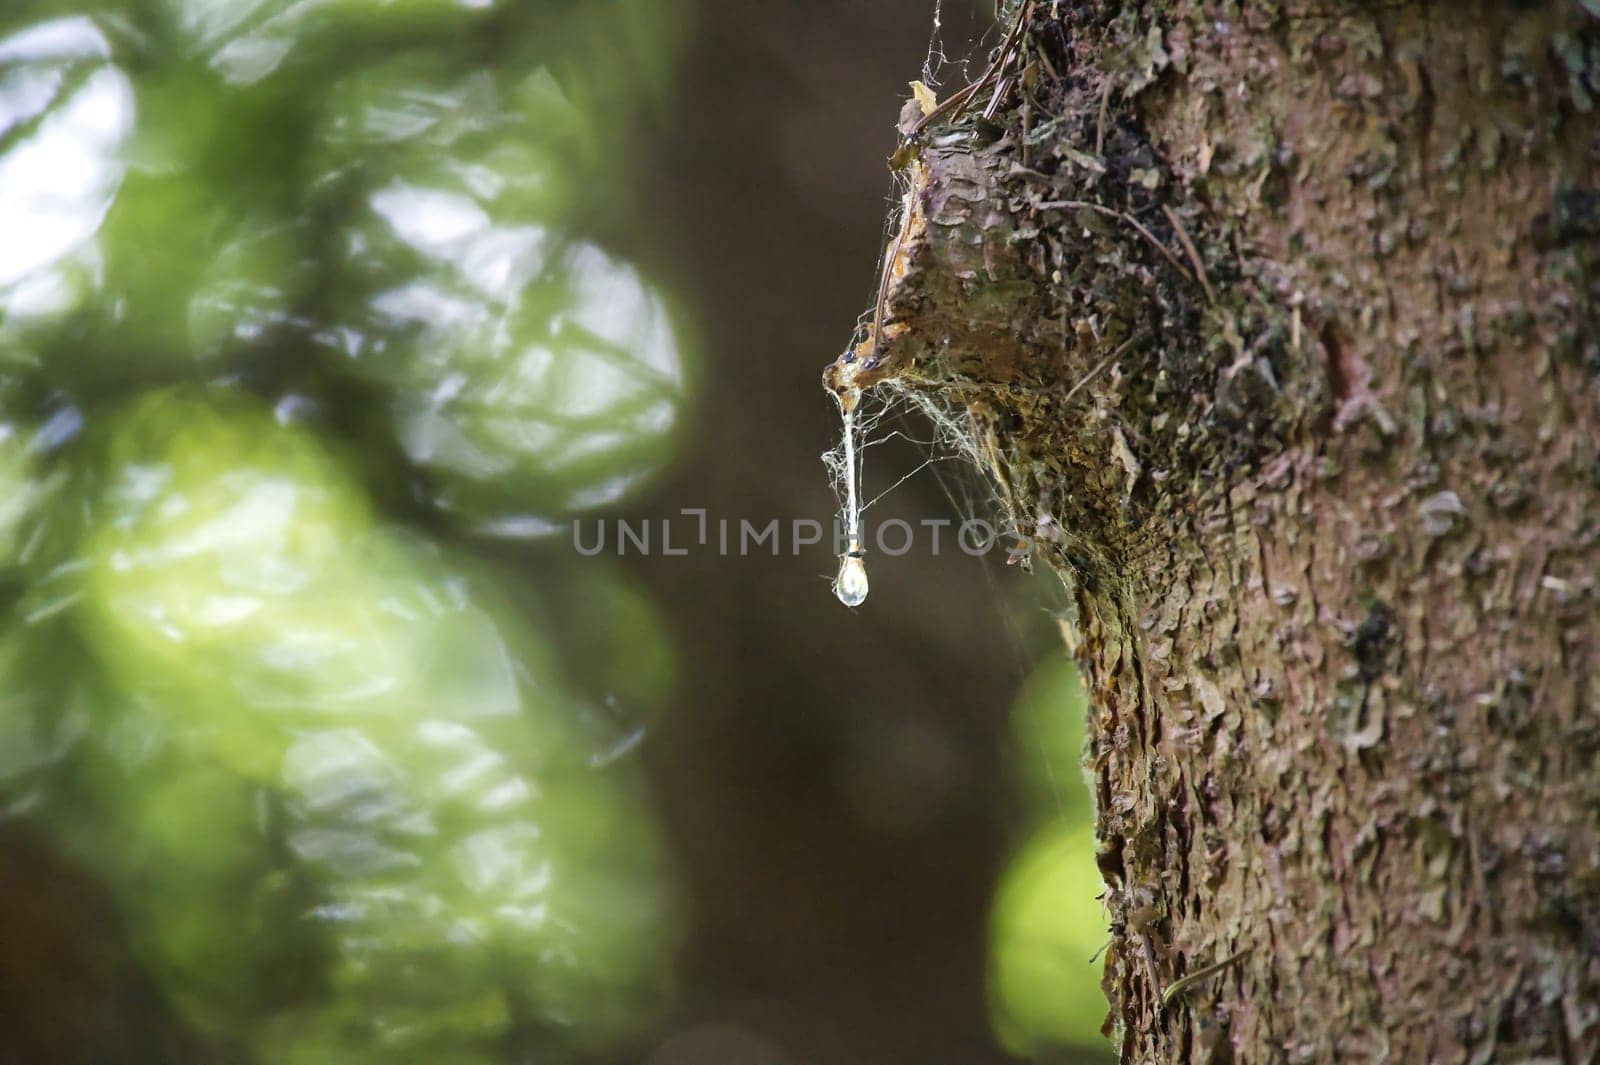 Detailed macro shot of a tree trunk with a clear drop of resin, highlighting natural tree sap in a lush forest setting.